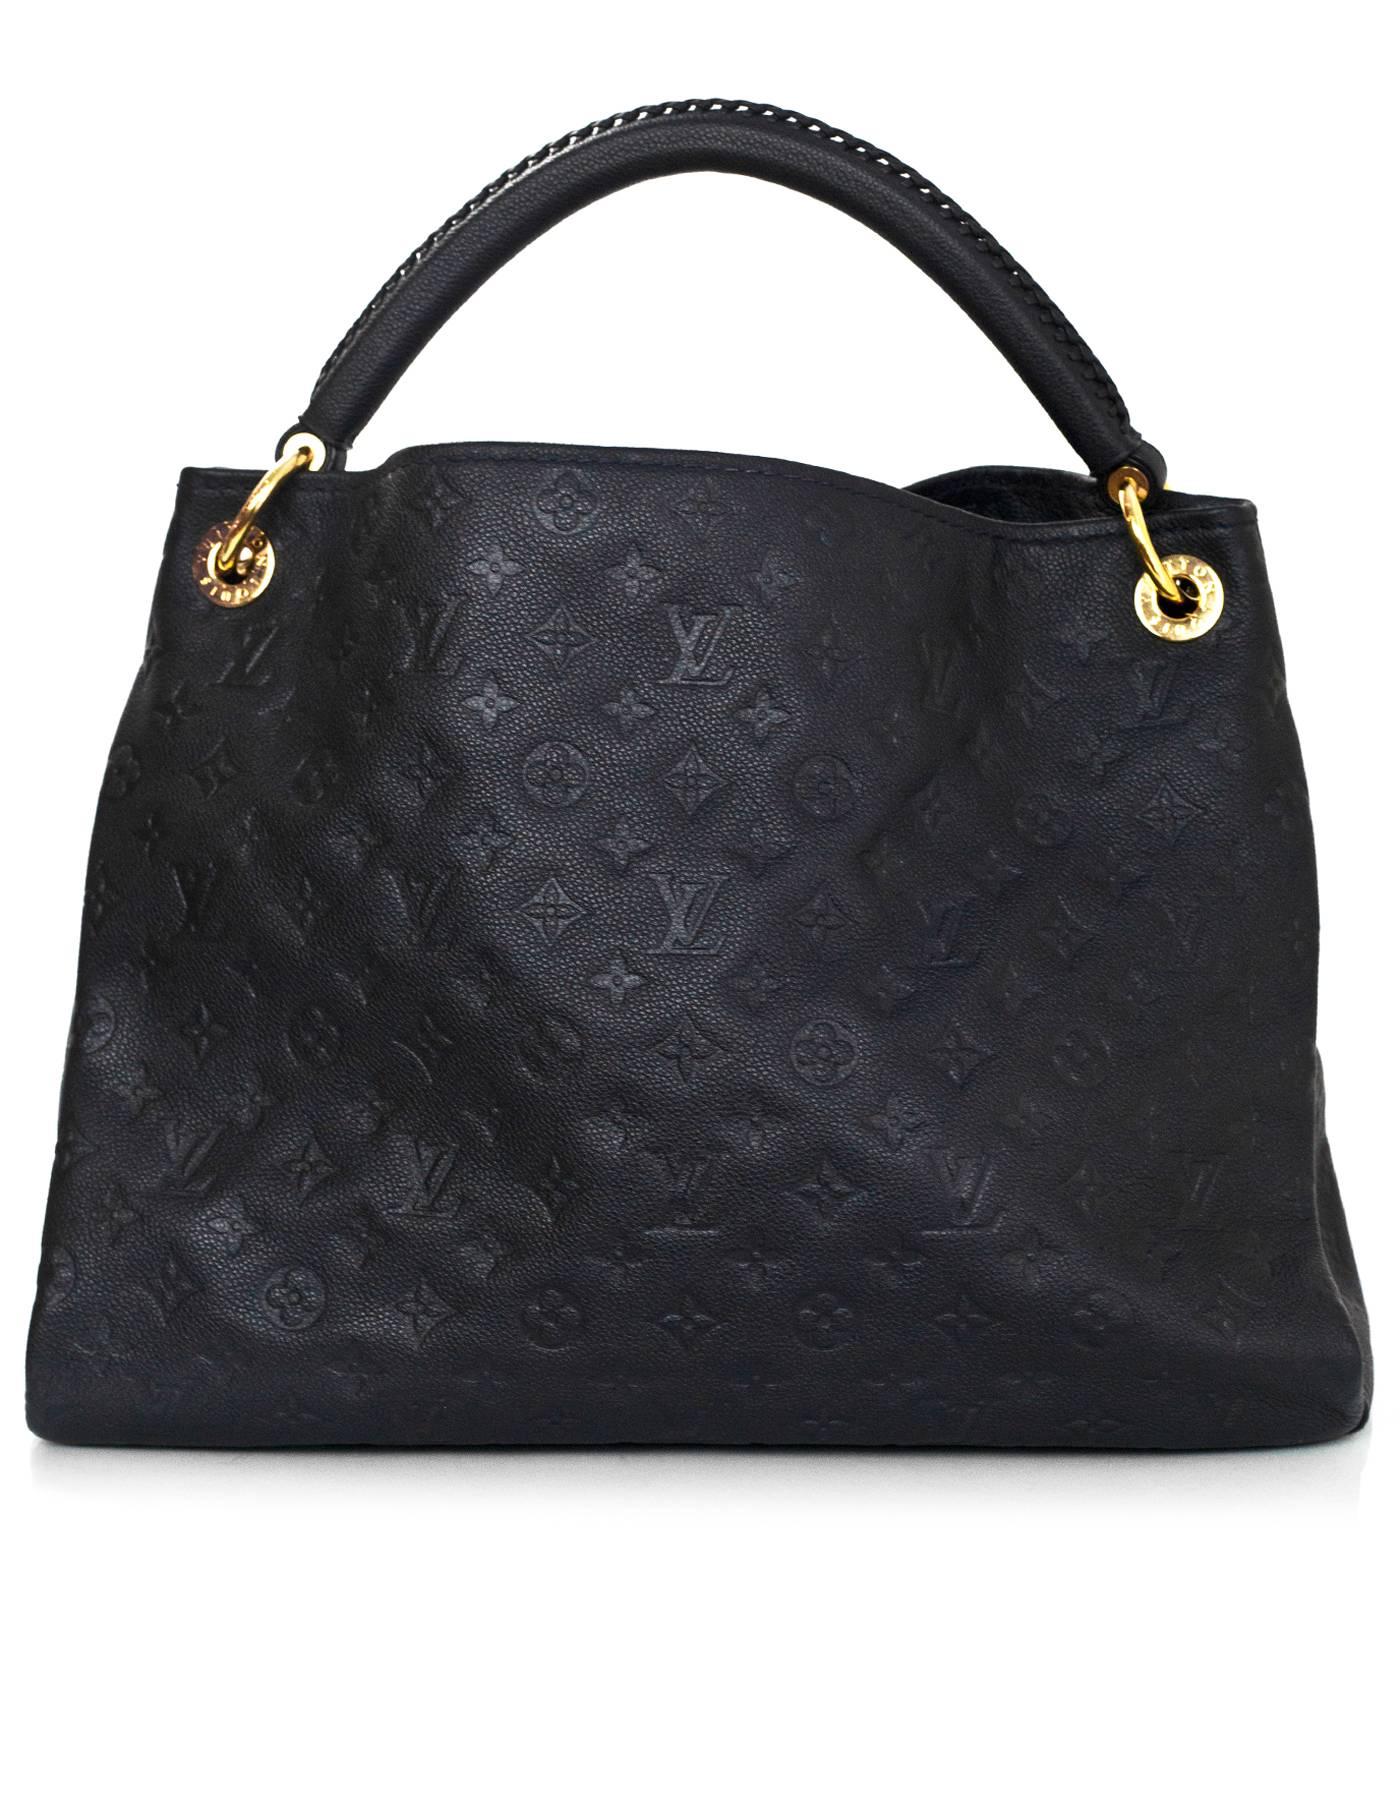 Louis Vuitton Blue Infini Monogram Empreinte Artsy MM

Made In: Spain
Year of Production: 2011
Color: Blue infini- dark navy
Hardware: Goldtone
Materials: Leather, metal
Lining: Blue and black textile
Closure/Opening: Open top
Exterior Pockets: